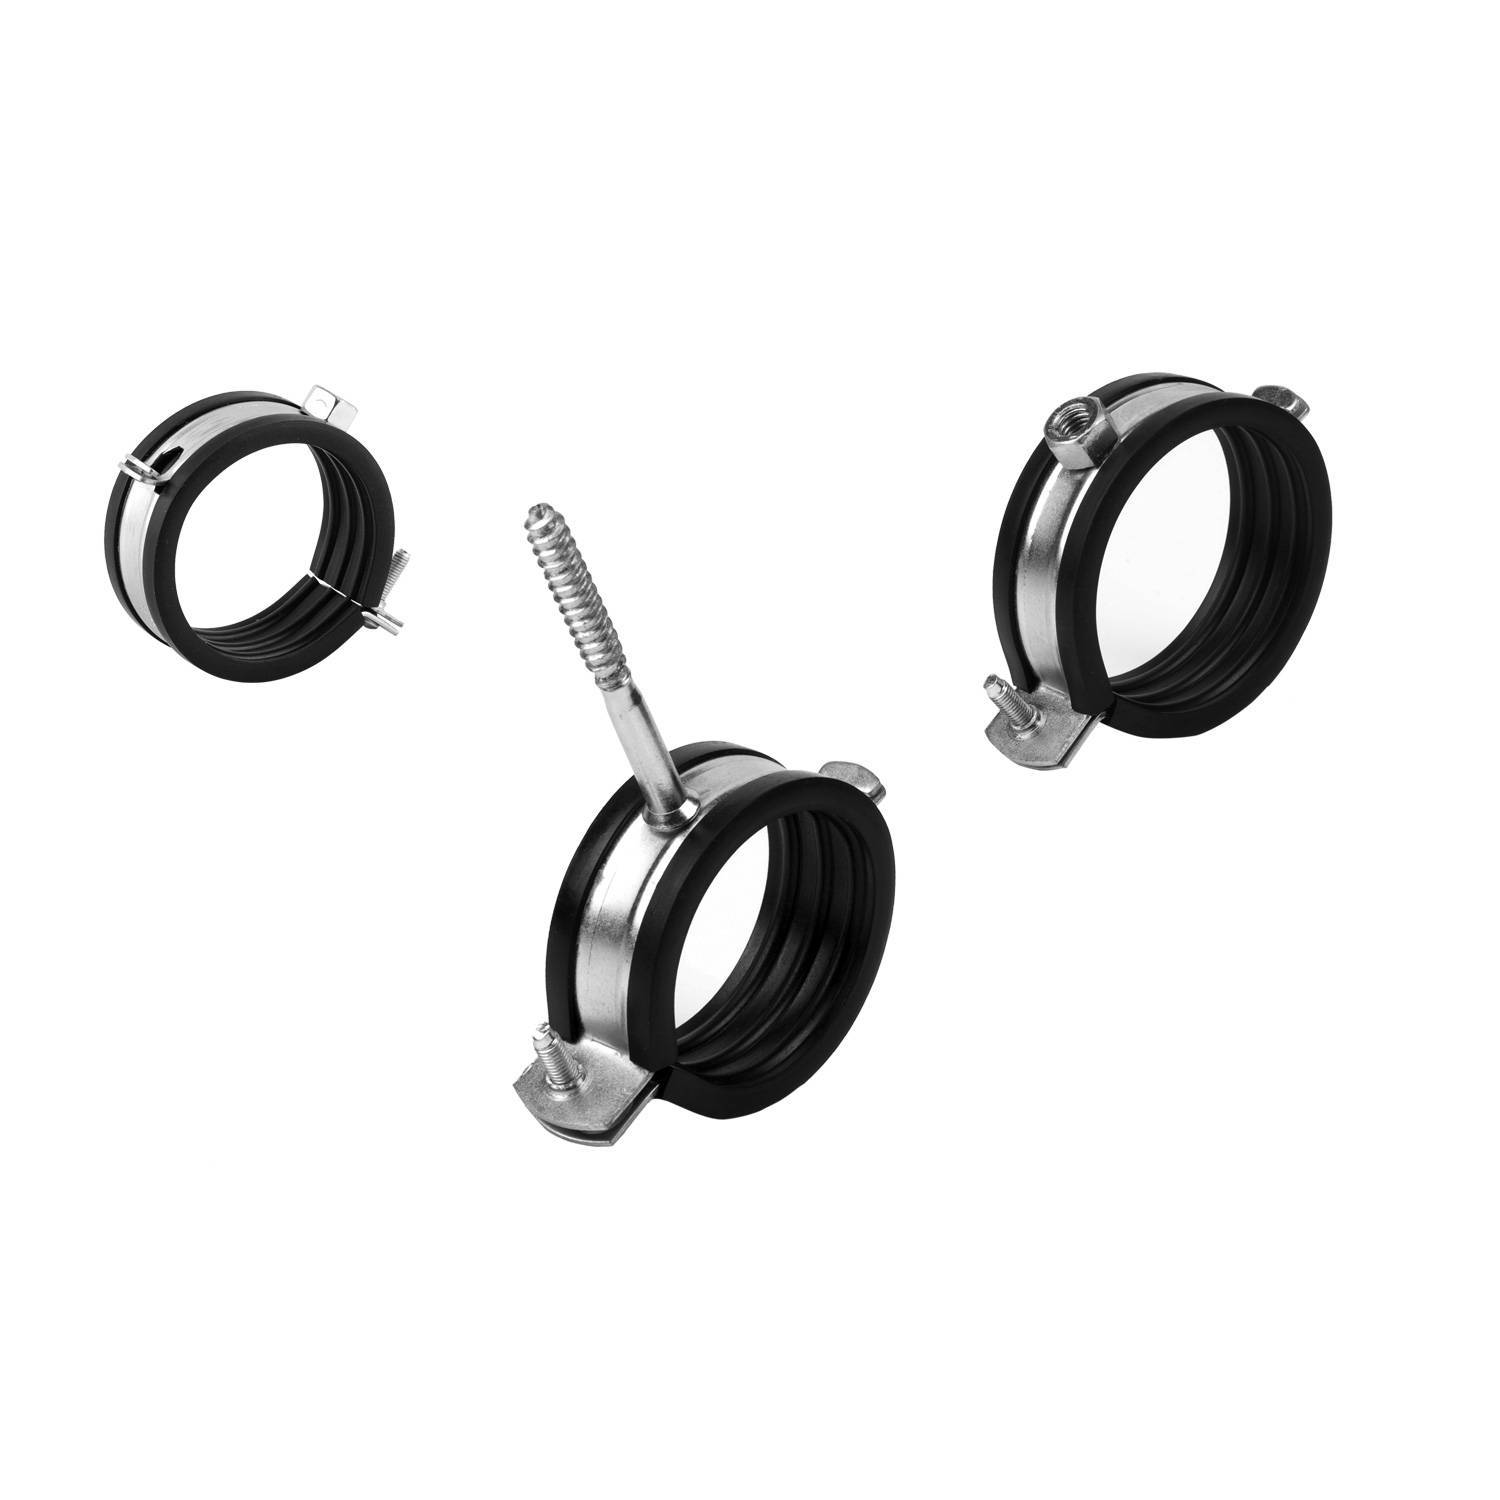 SINGLE SIDED PIPE CLAMPS